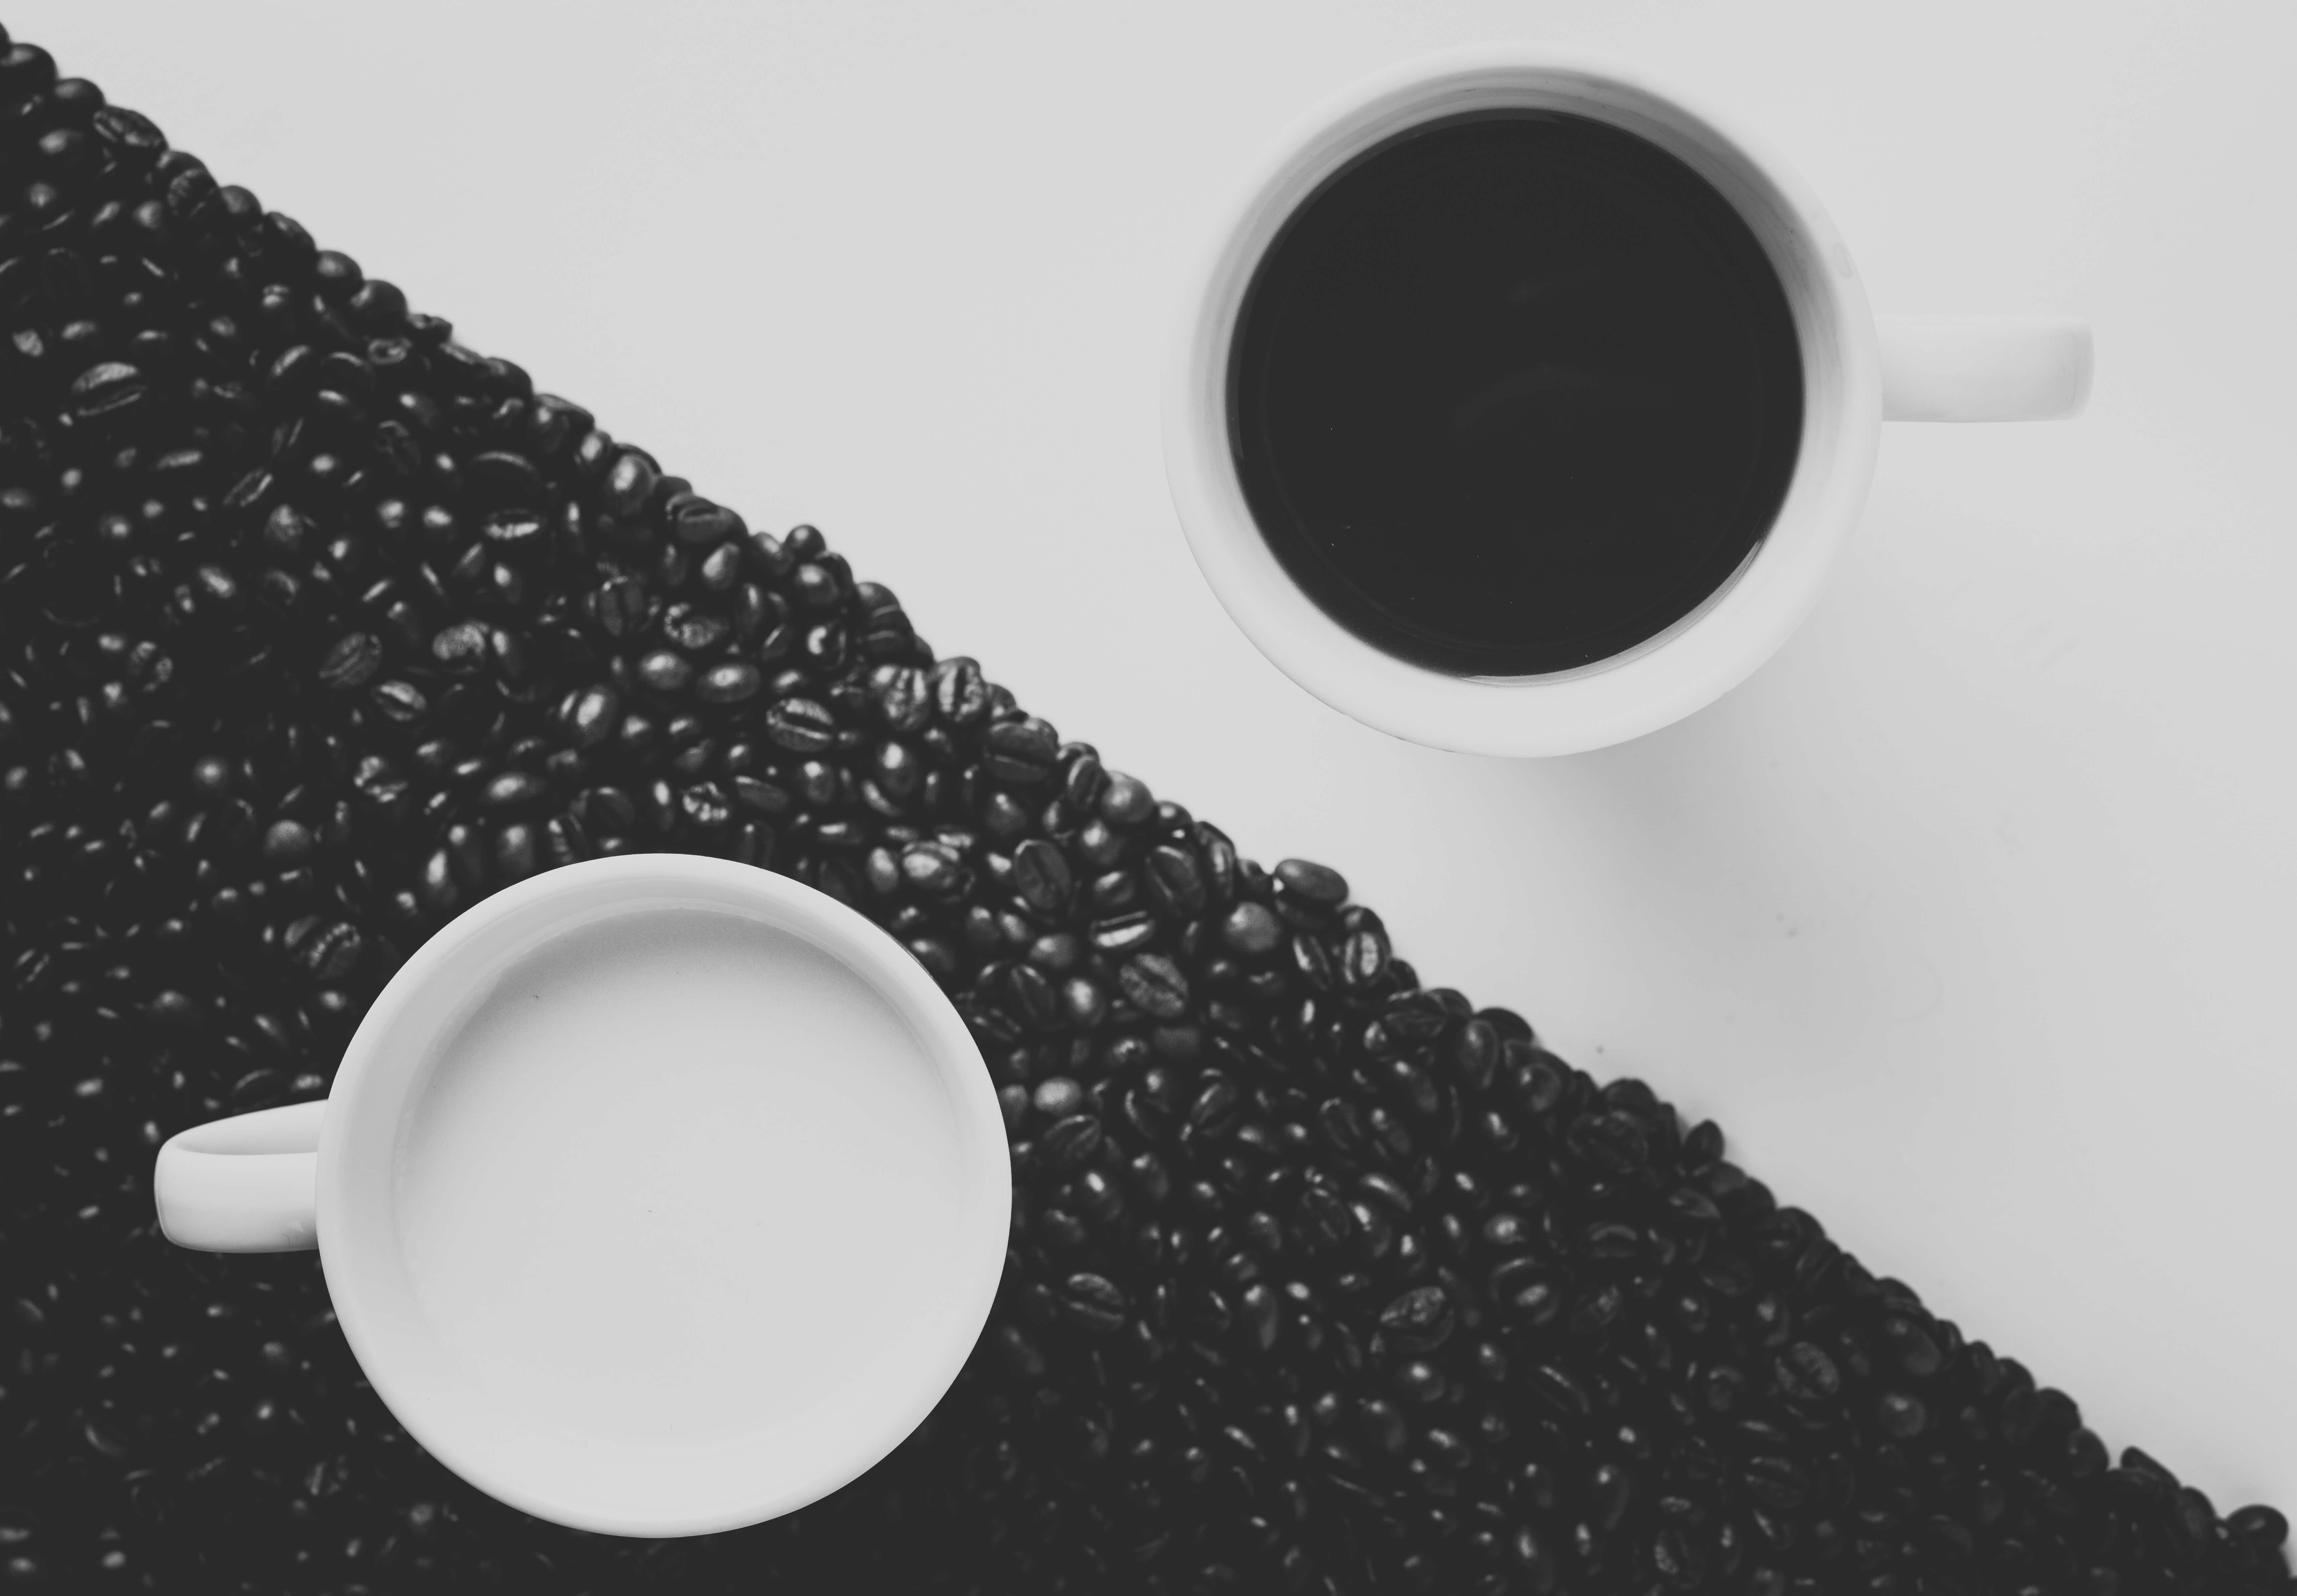 Two coffee mugs placed diagonally opposite to each other and coffee beans scattered around one of the mugs